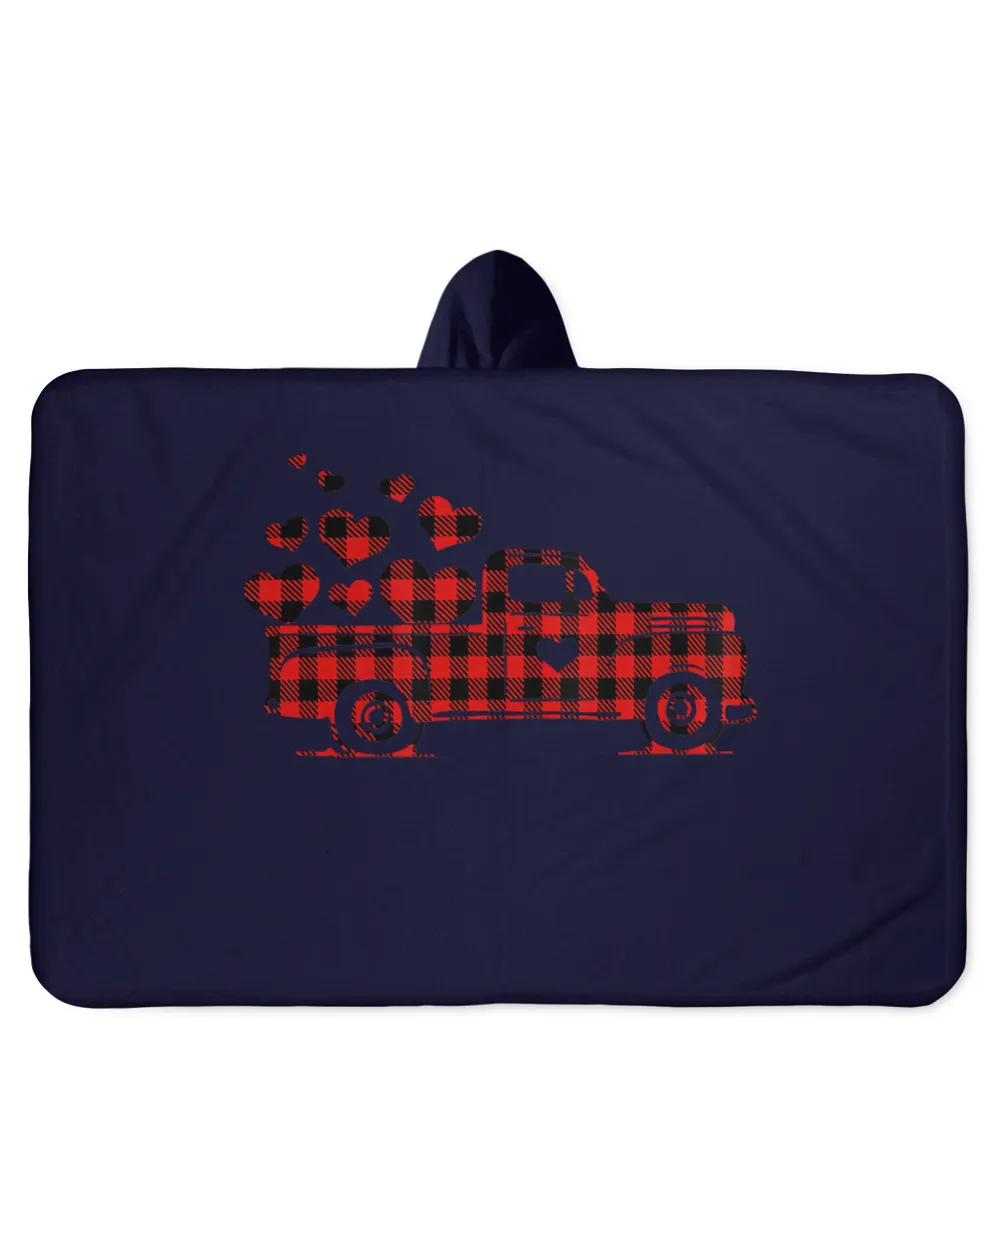 Red Plaid Truck Happy Valentines Day 2021 Couple Matching T-Shirt